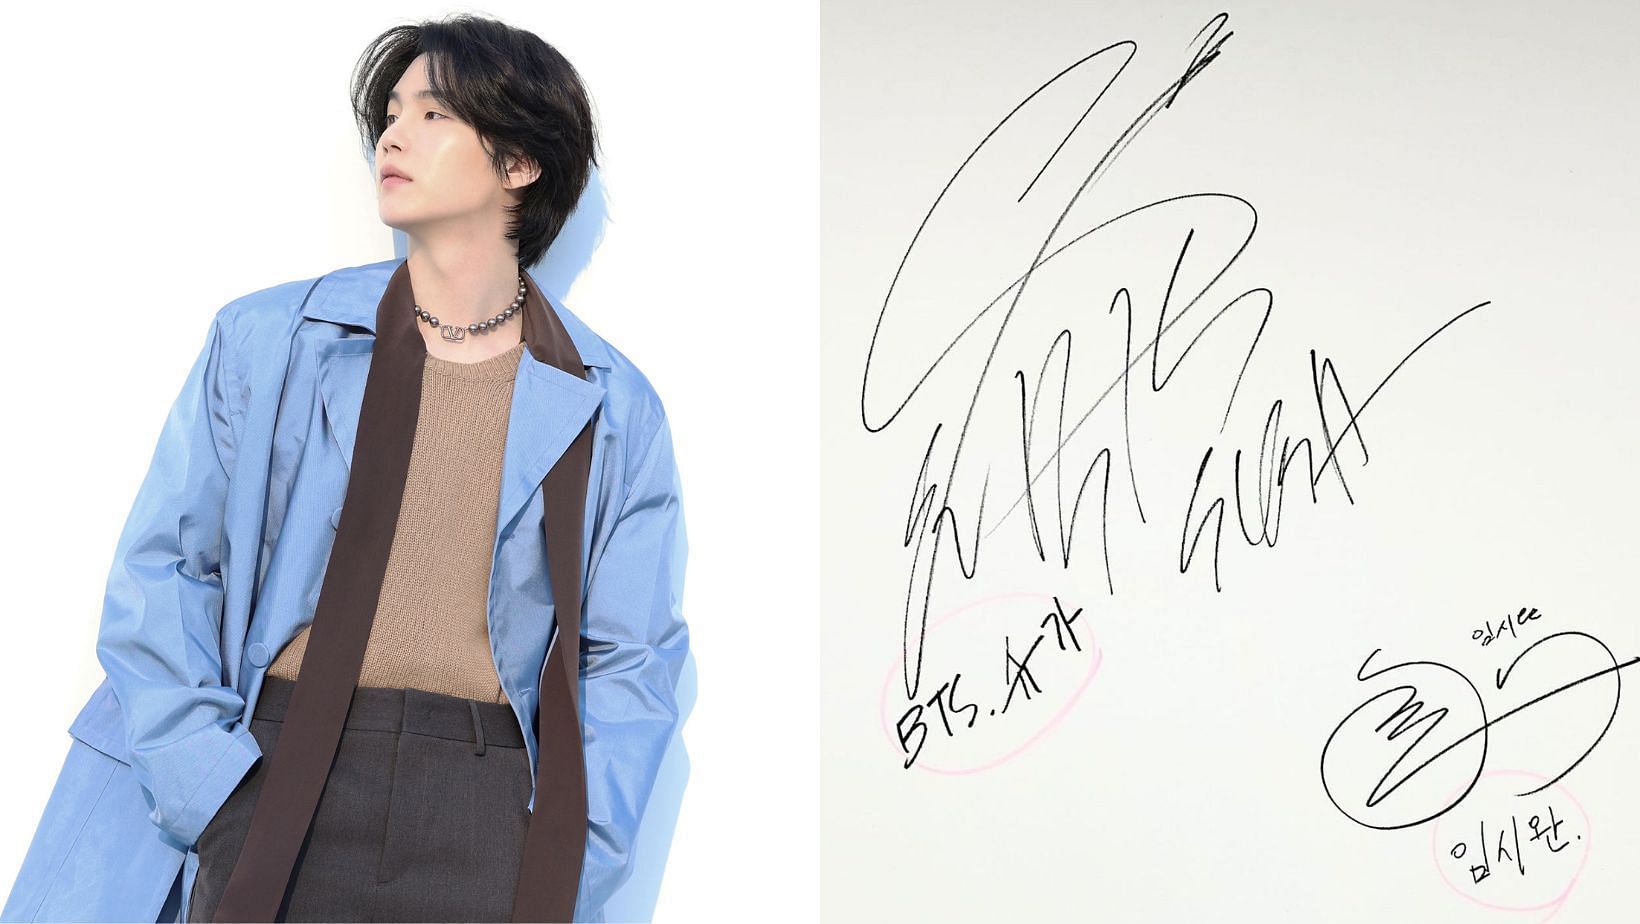 BTS&rsquo; Suga reportedly graces Actor Ma Dong-Seok&rsquo;s boxing gym launch event, leaving a signature on the wall. (Images via X/@bts_bighti &amp; Instagram/@donlee)